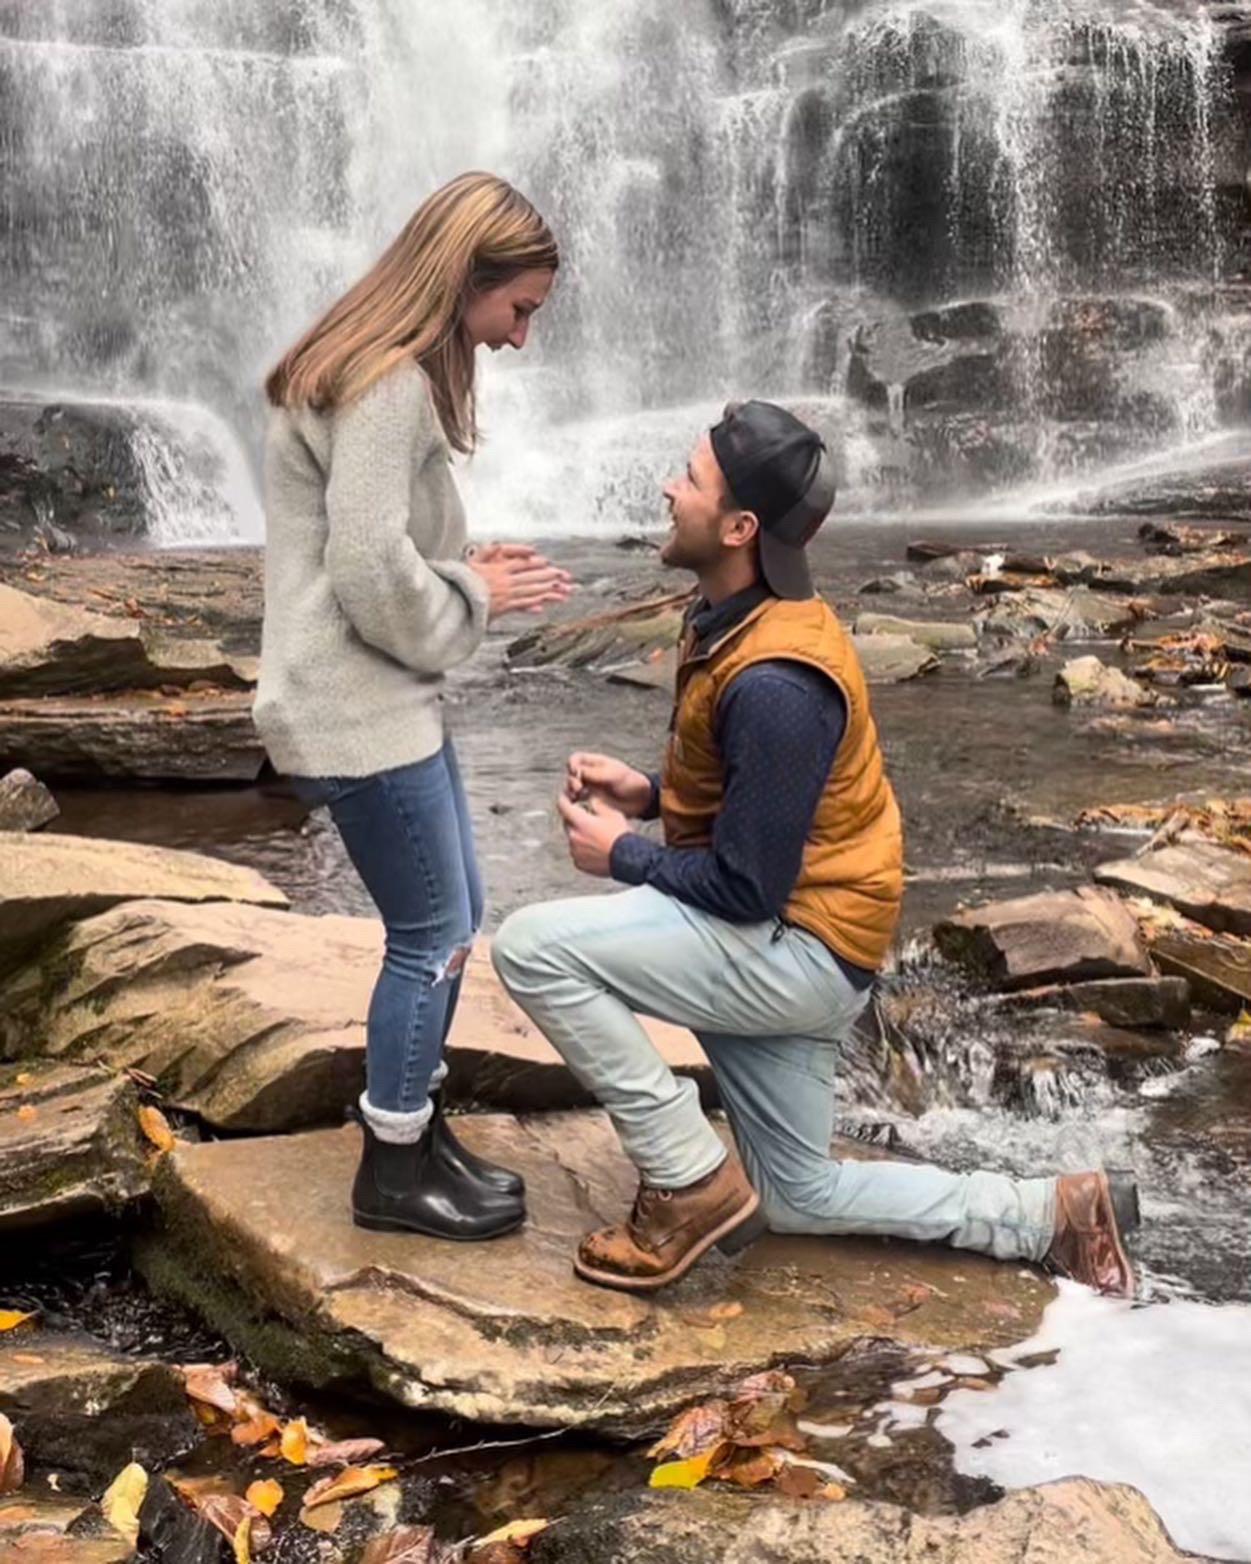 The best “yes”! ❤️💍